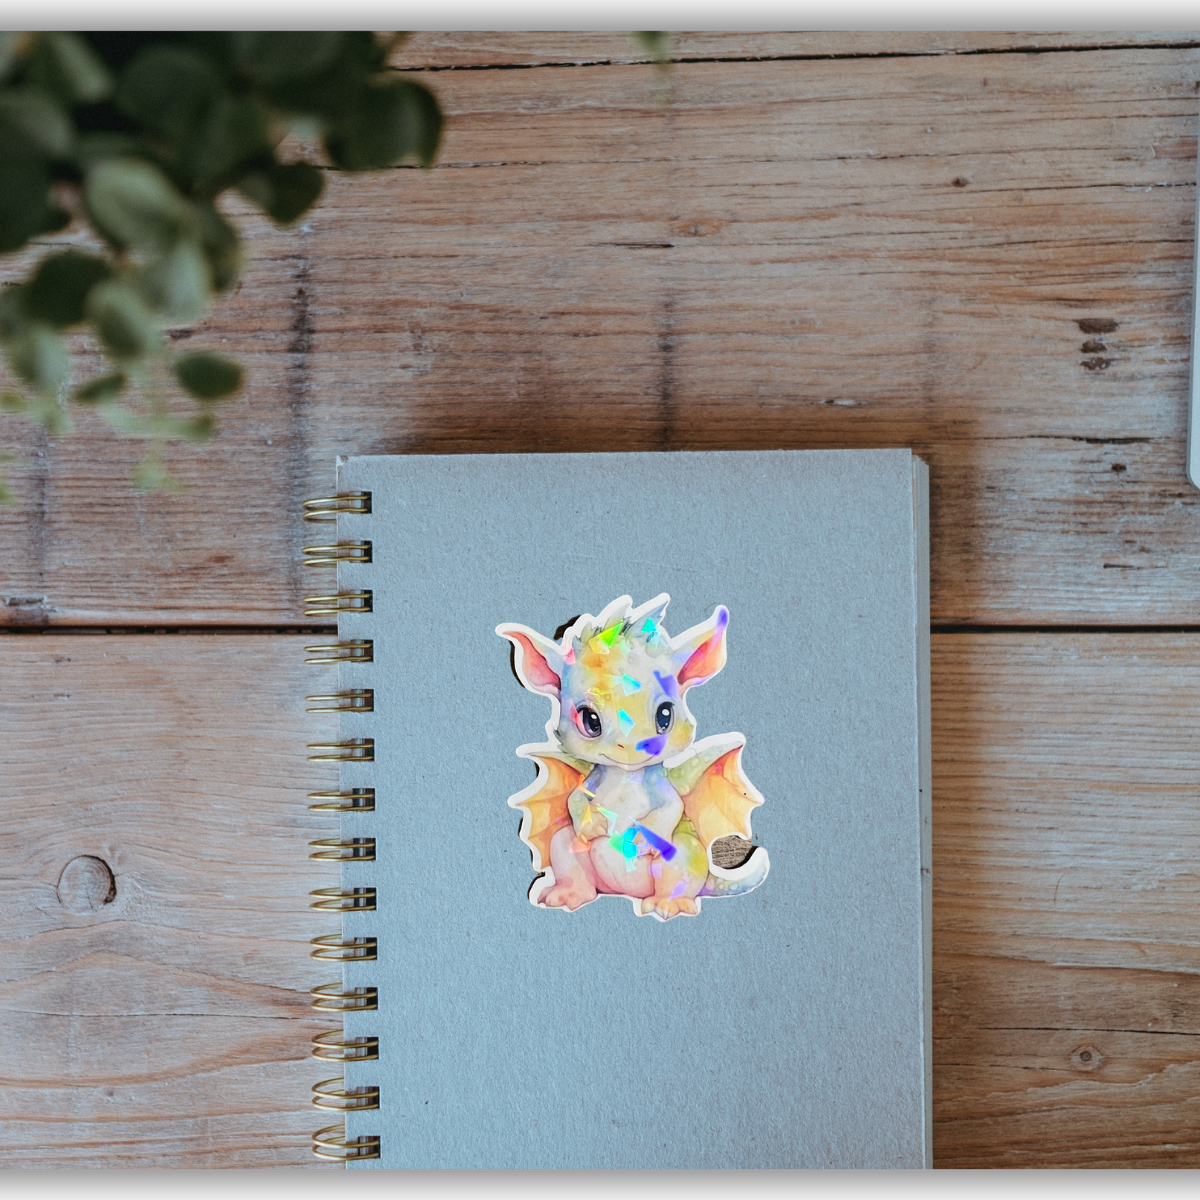 Water-Resistant Holographic White Baby Dragon Sticker